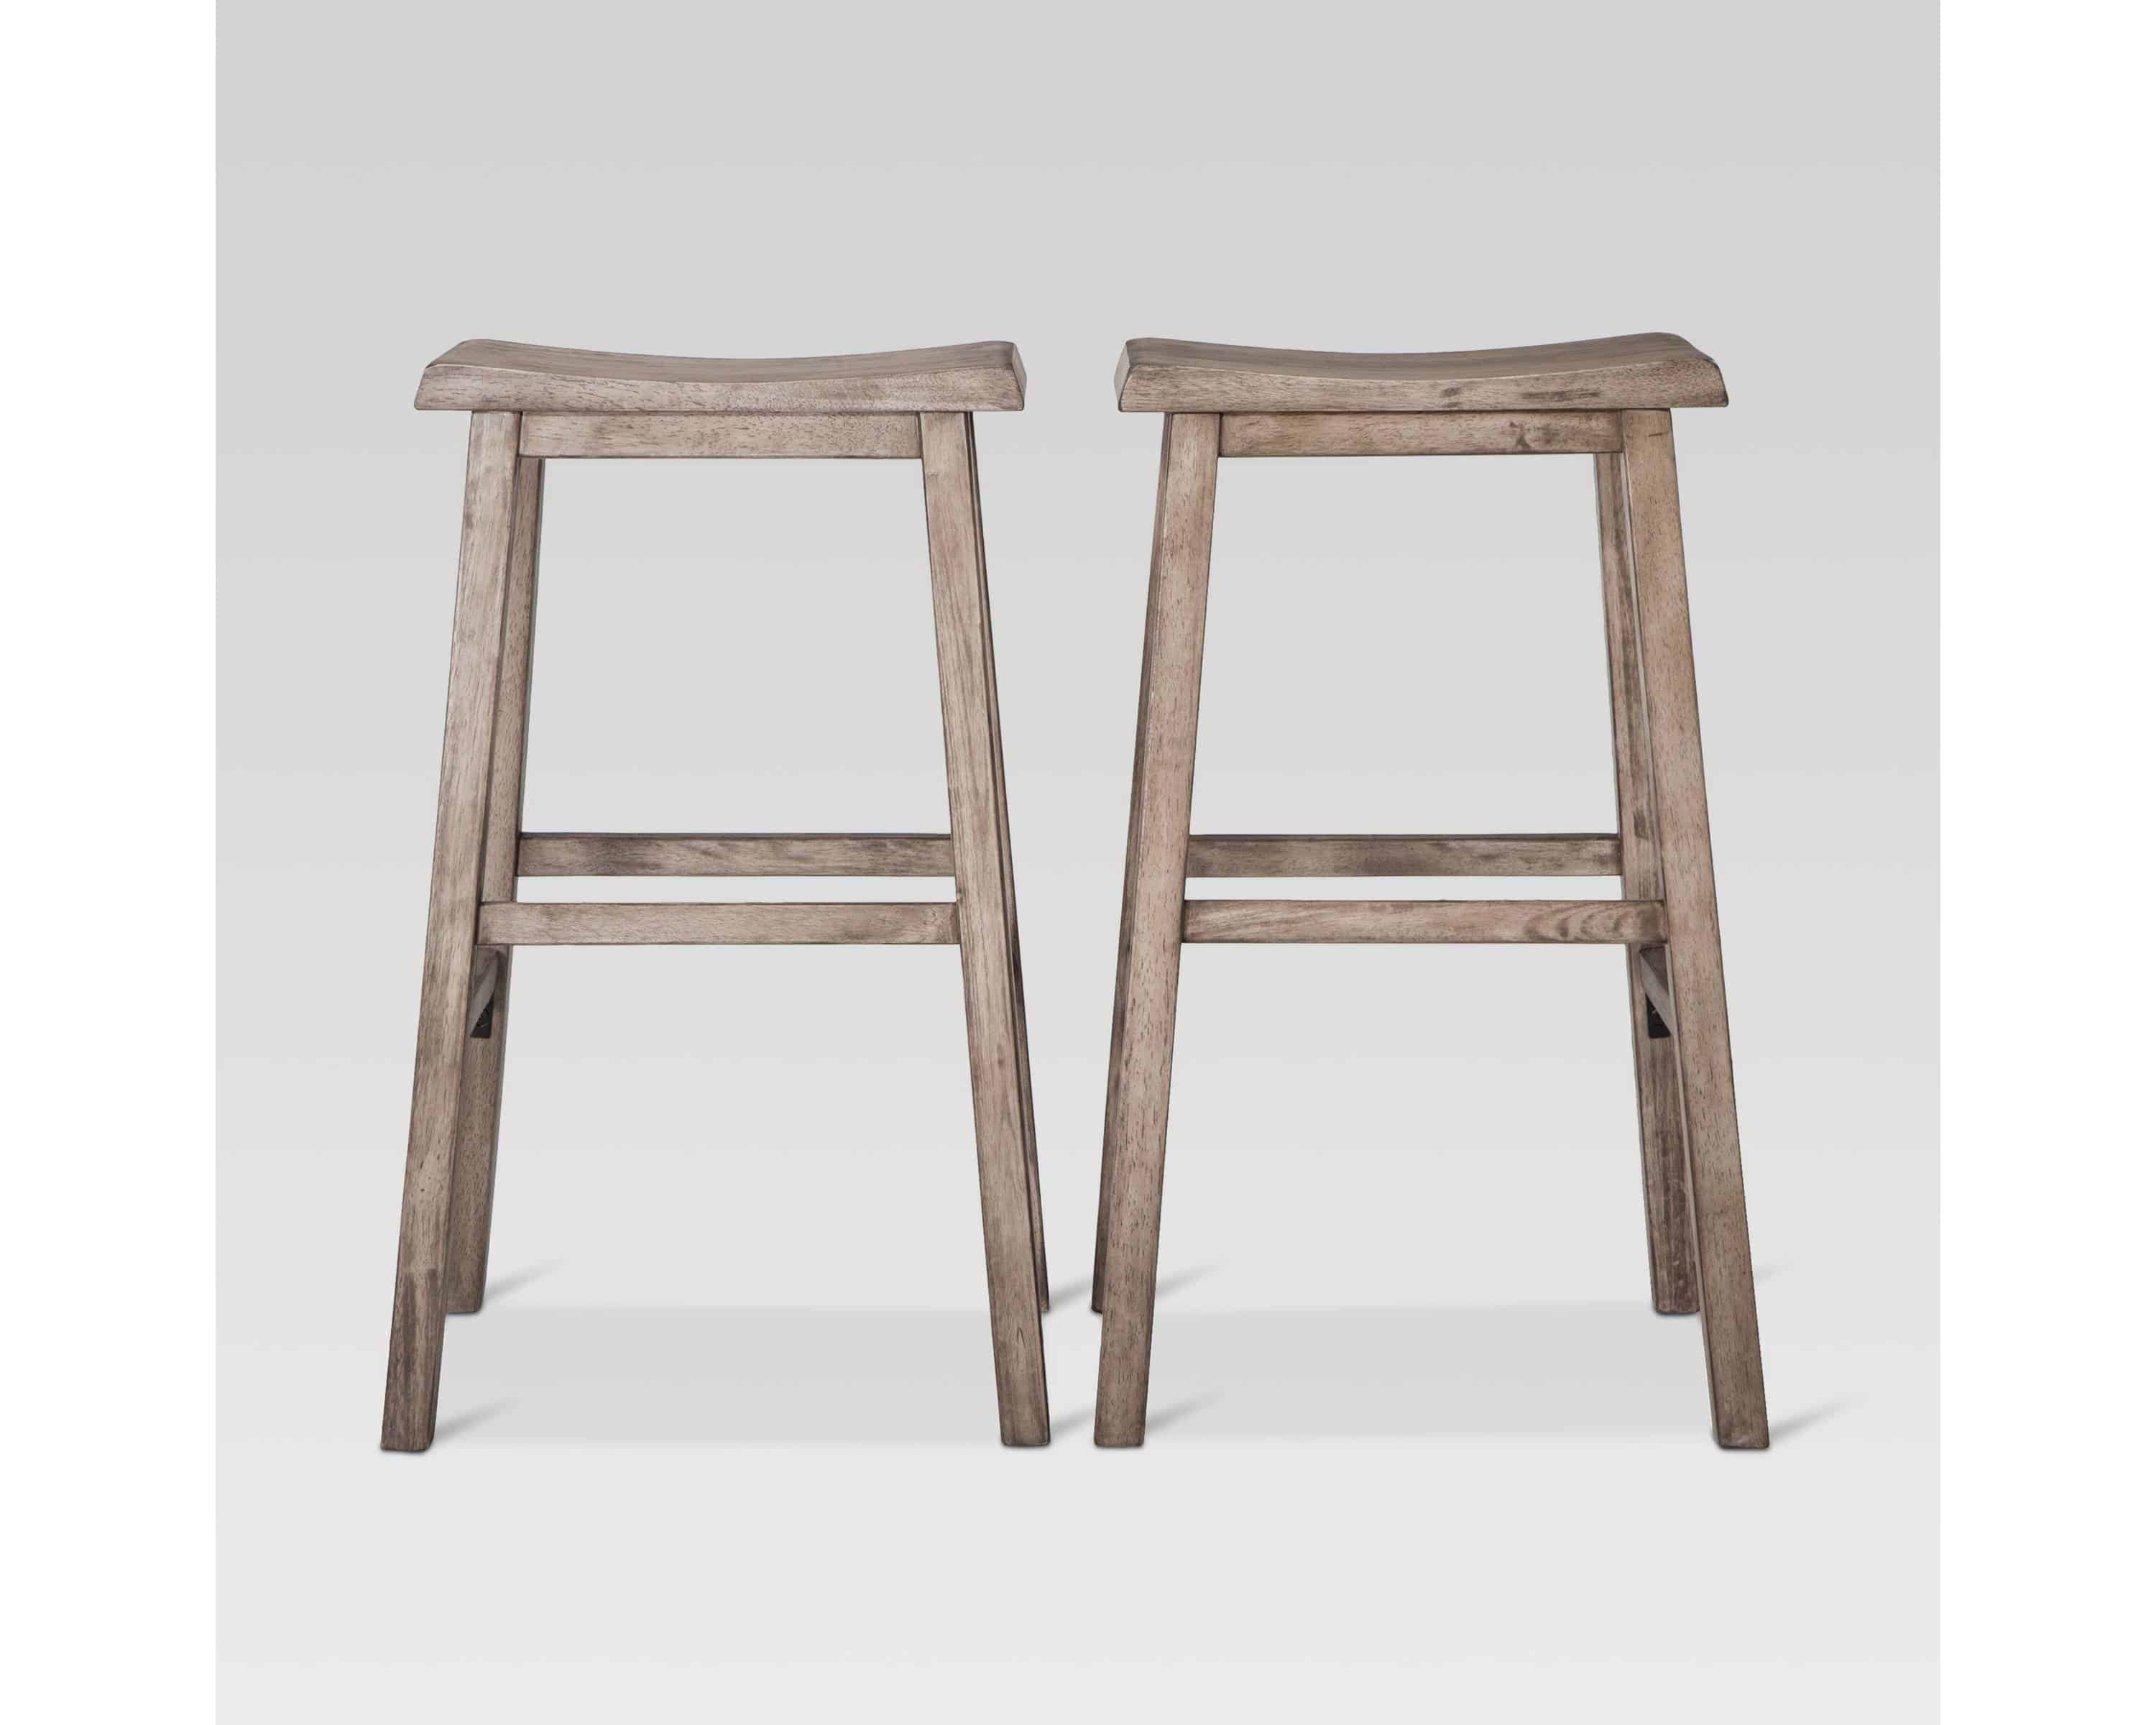 15 Bar Stools You Should Be Ing, Dovercliff 24 Bar Stool